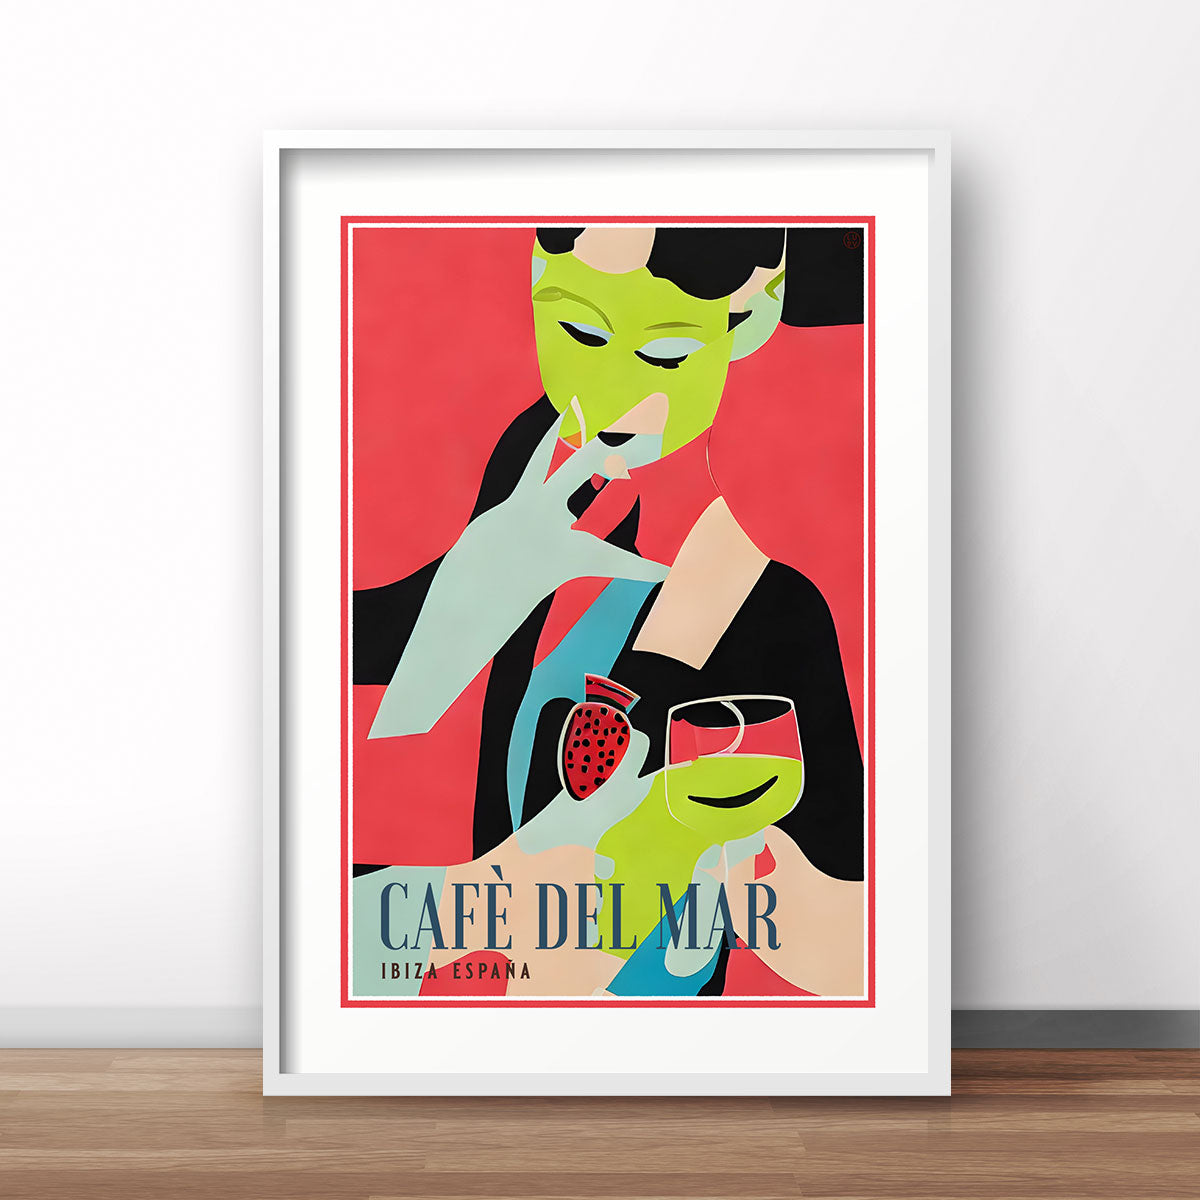 Cafe Del Mar Ibiza retro vintage poster print from Places We Luv